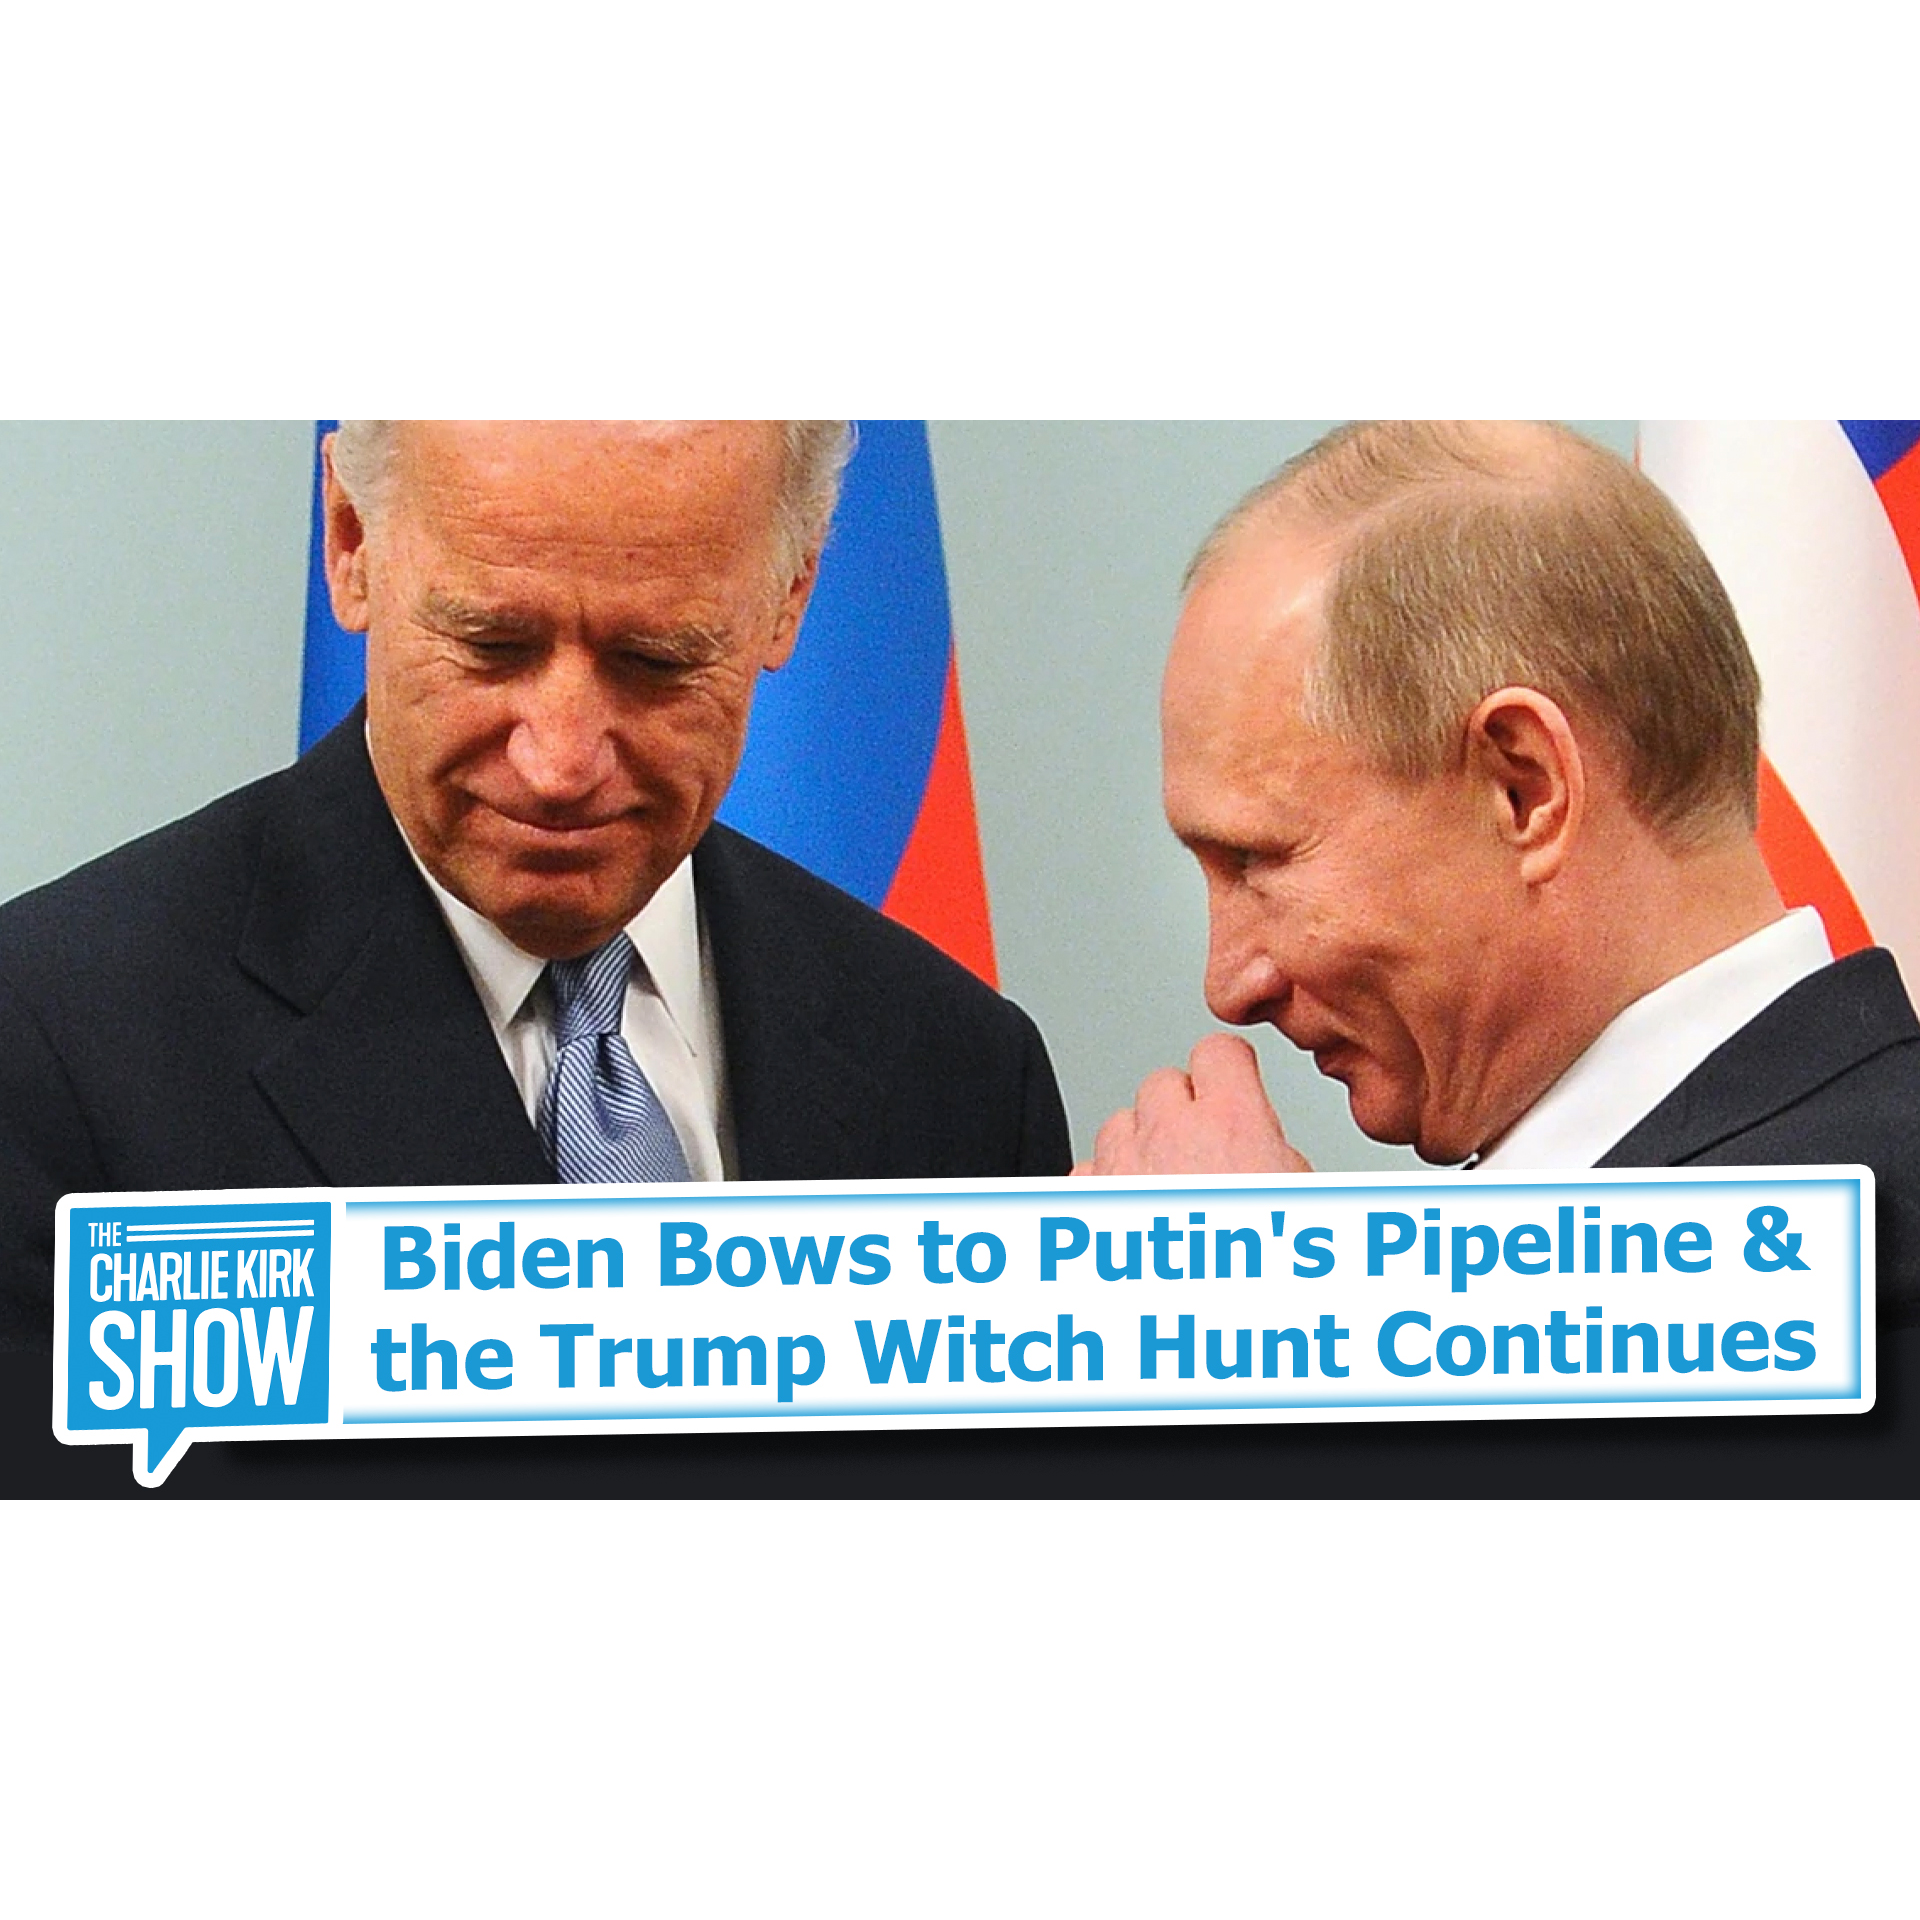 Biden Bows to Putin's Pipeline + the Trump Witch Hunt Continues